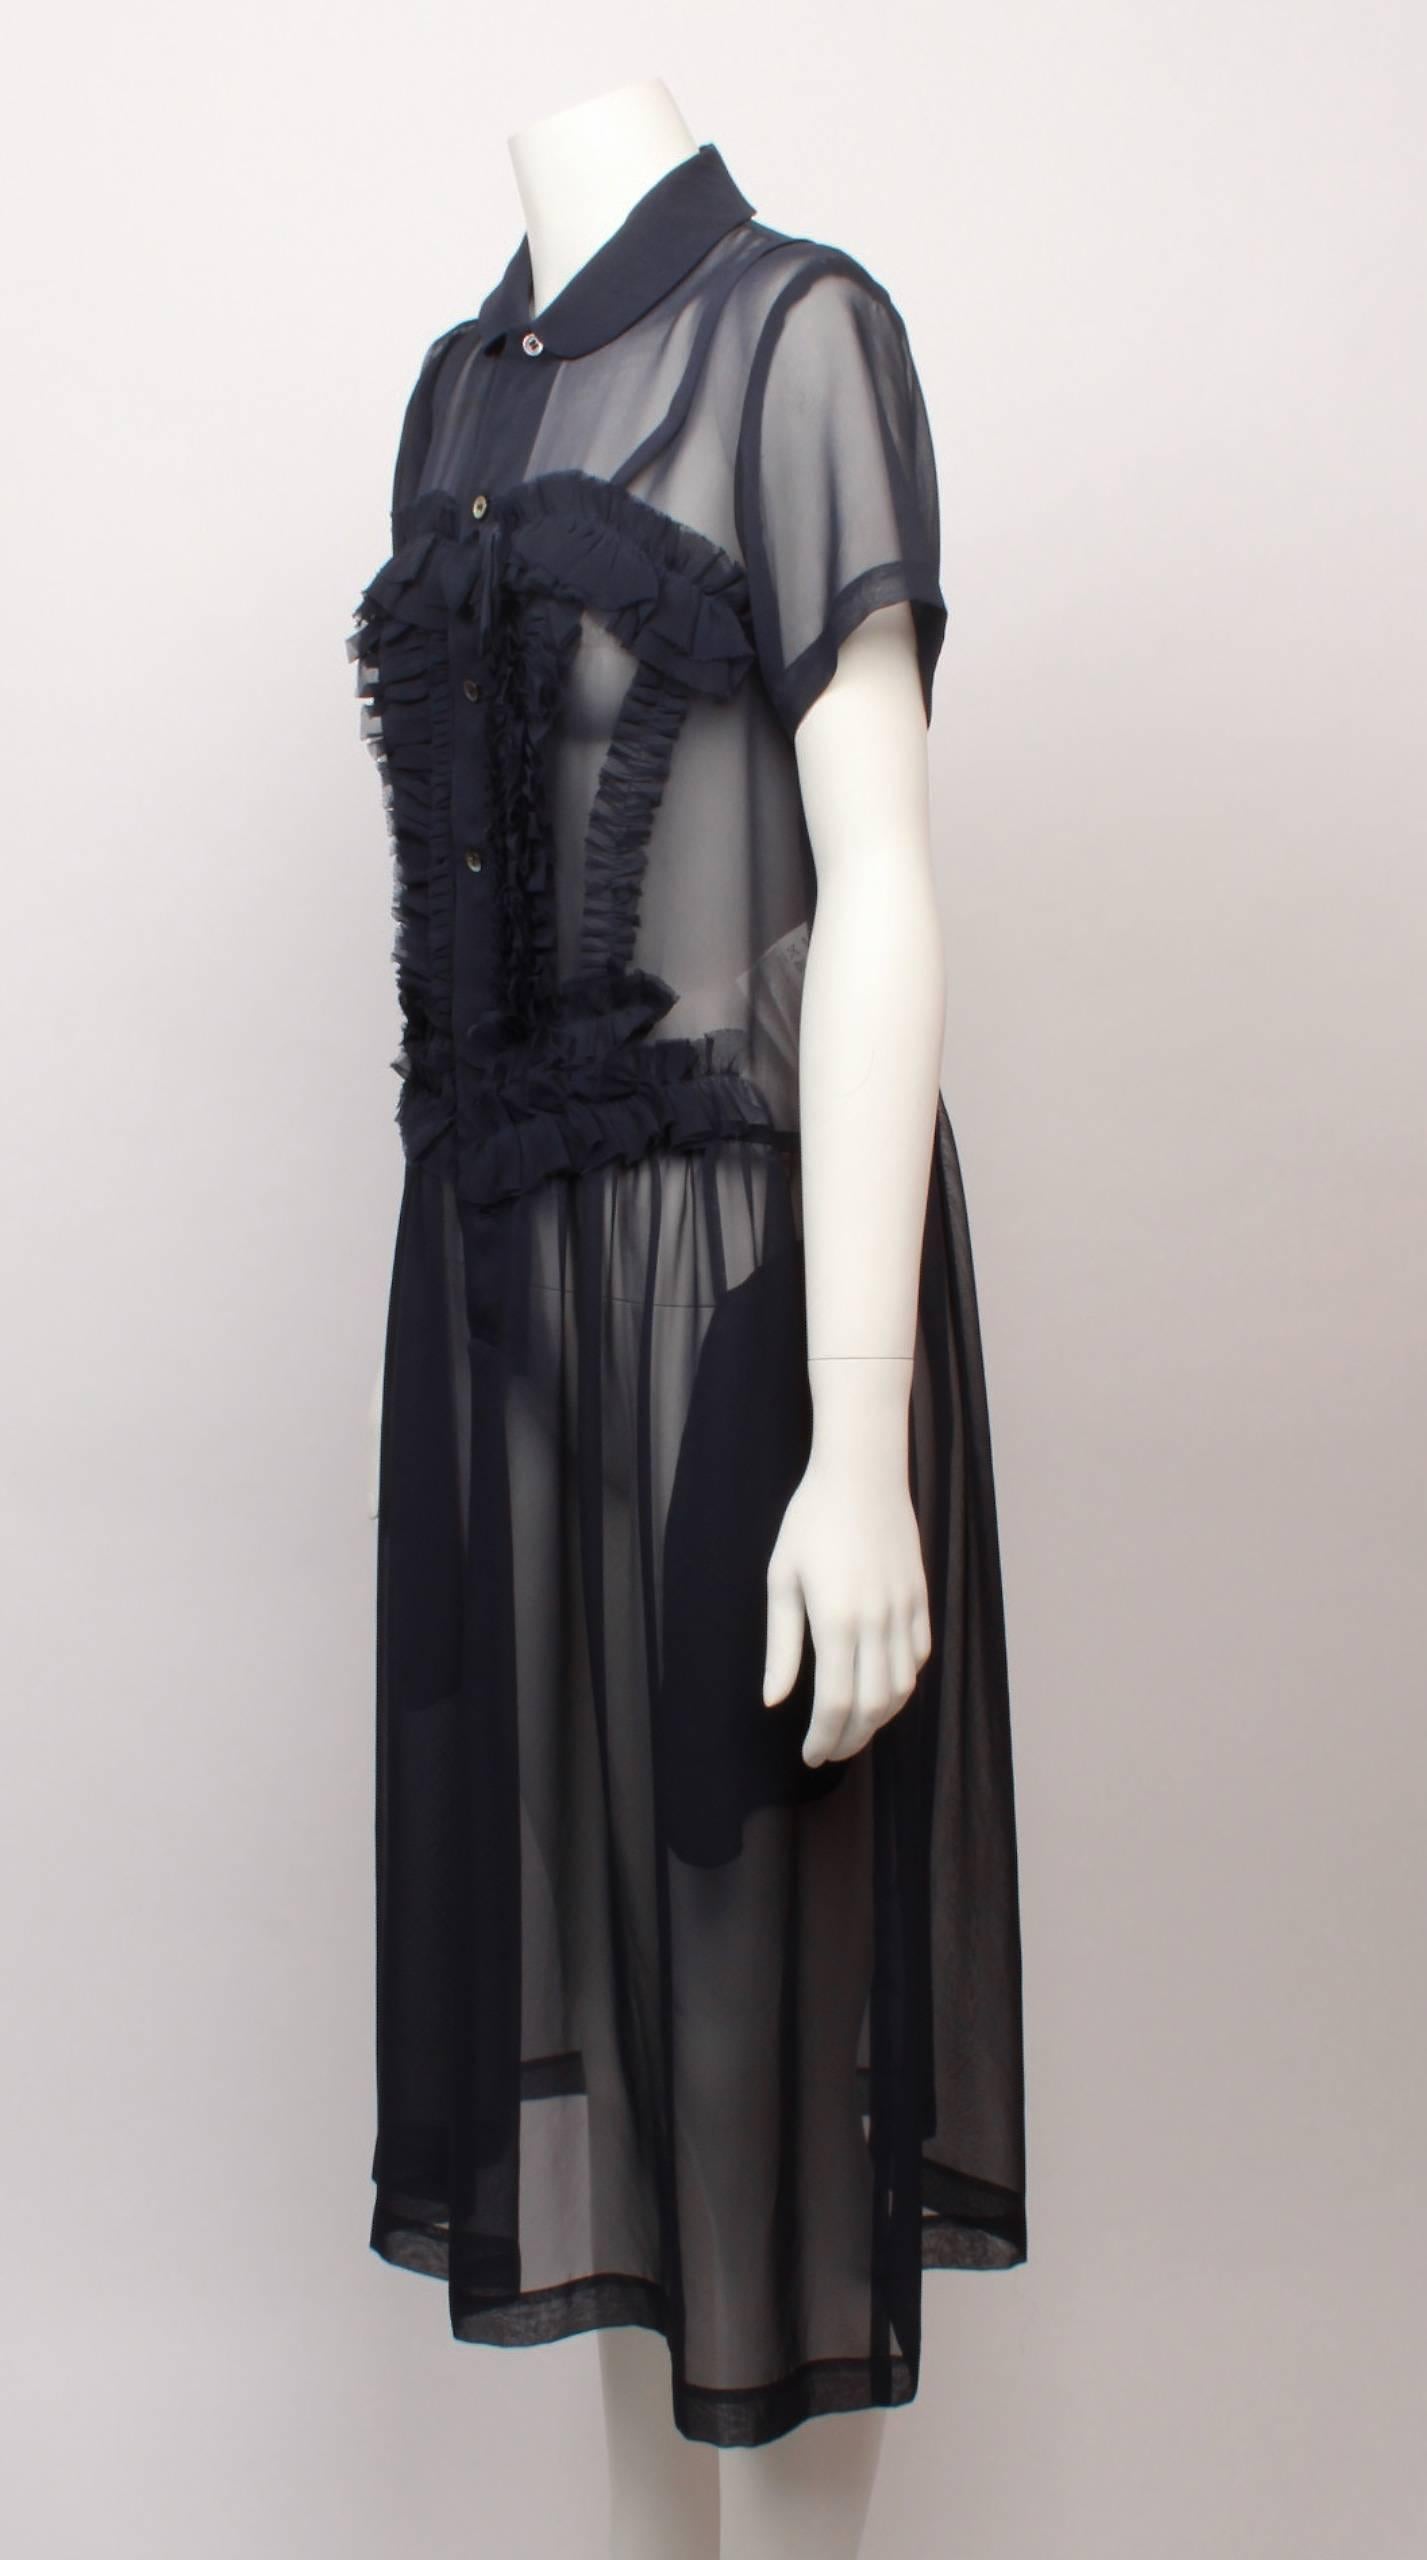 Comme des Garcons Sheer navy silk chiffon frill dress features soft tuxedo frills with decorative bow.  Frills also run horizontally above the bust line to create a cute sweetheart shape. 

Dress has a peter pan collar, button through front placket